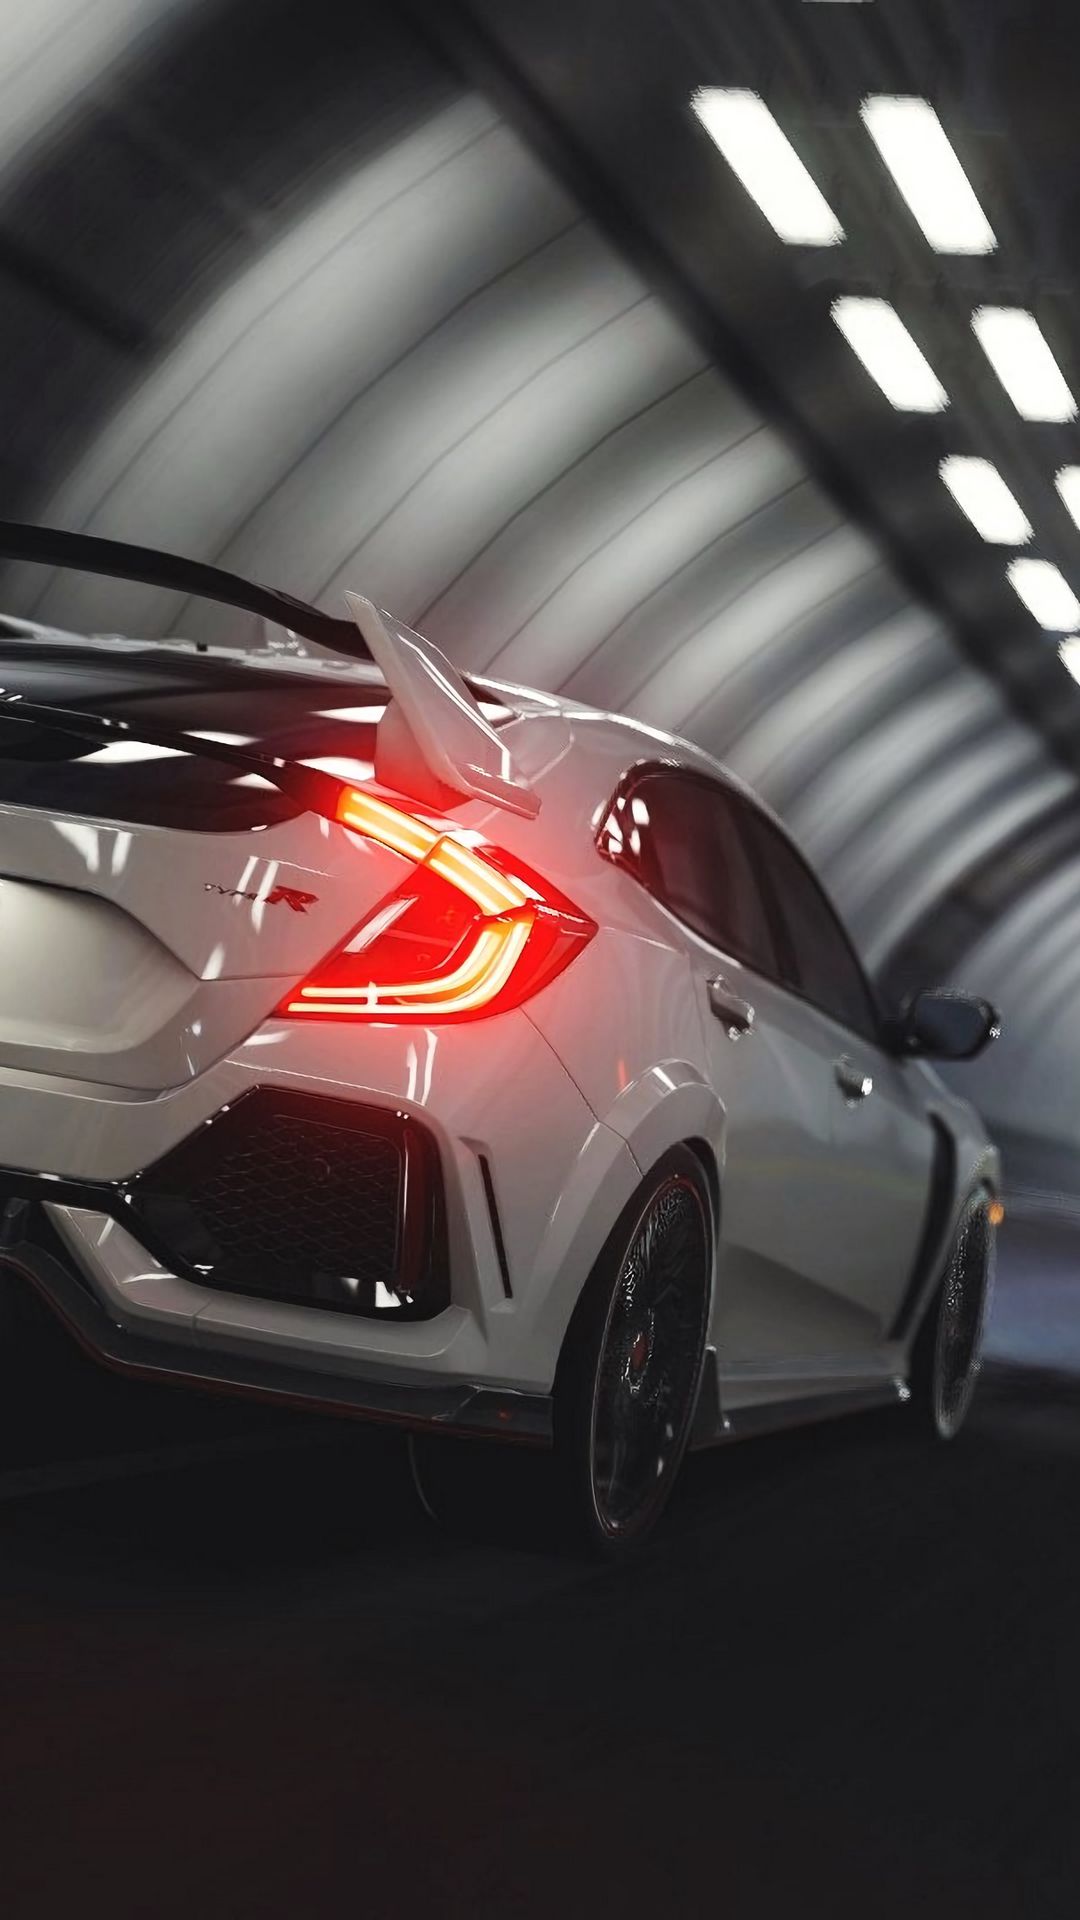 Honda Civic Type R Pictures  Download Free Images on Unsplash